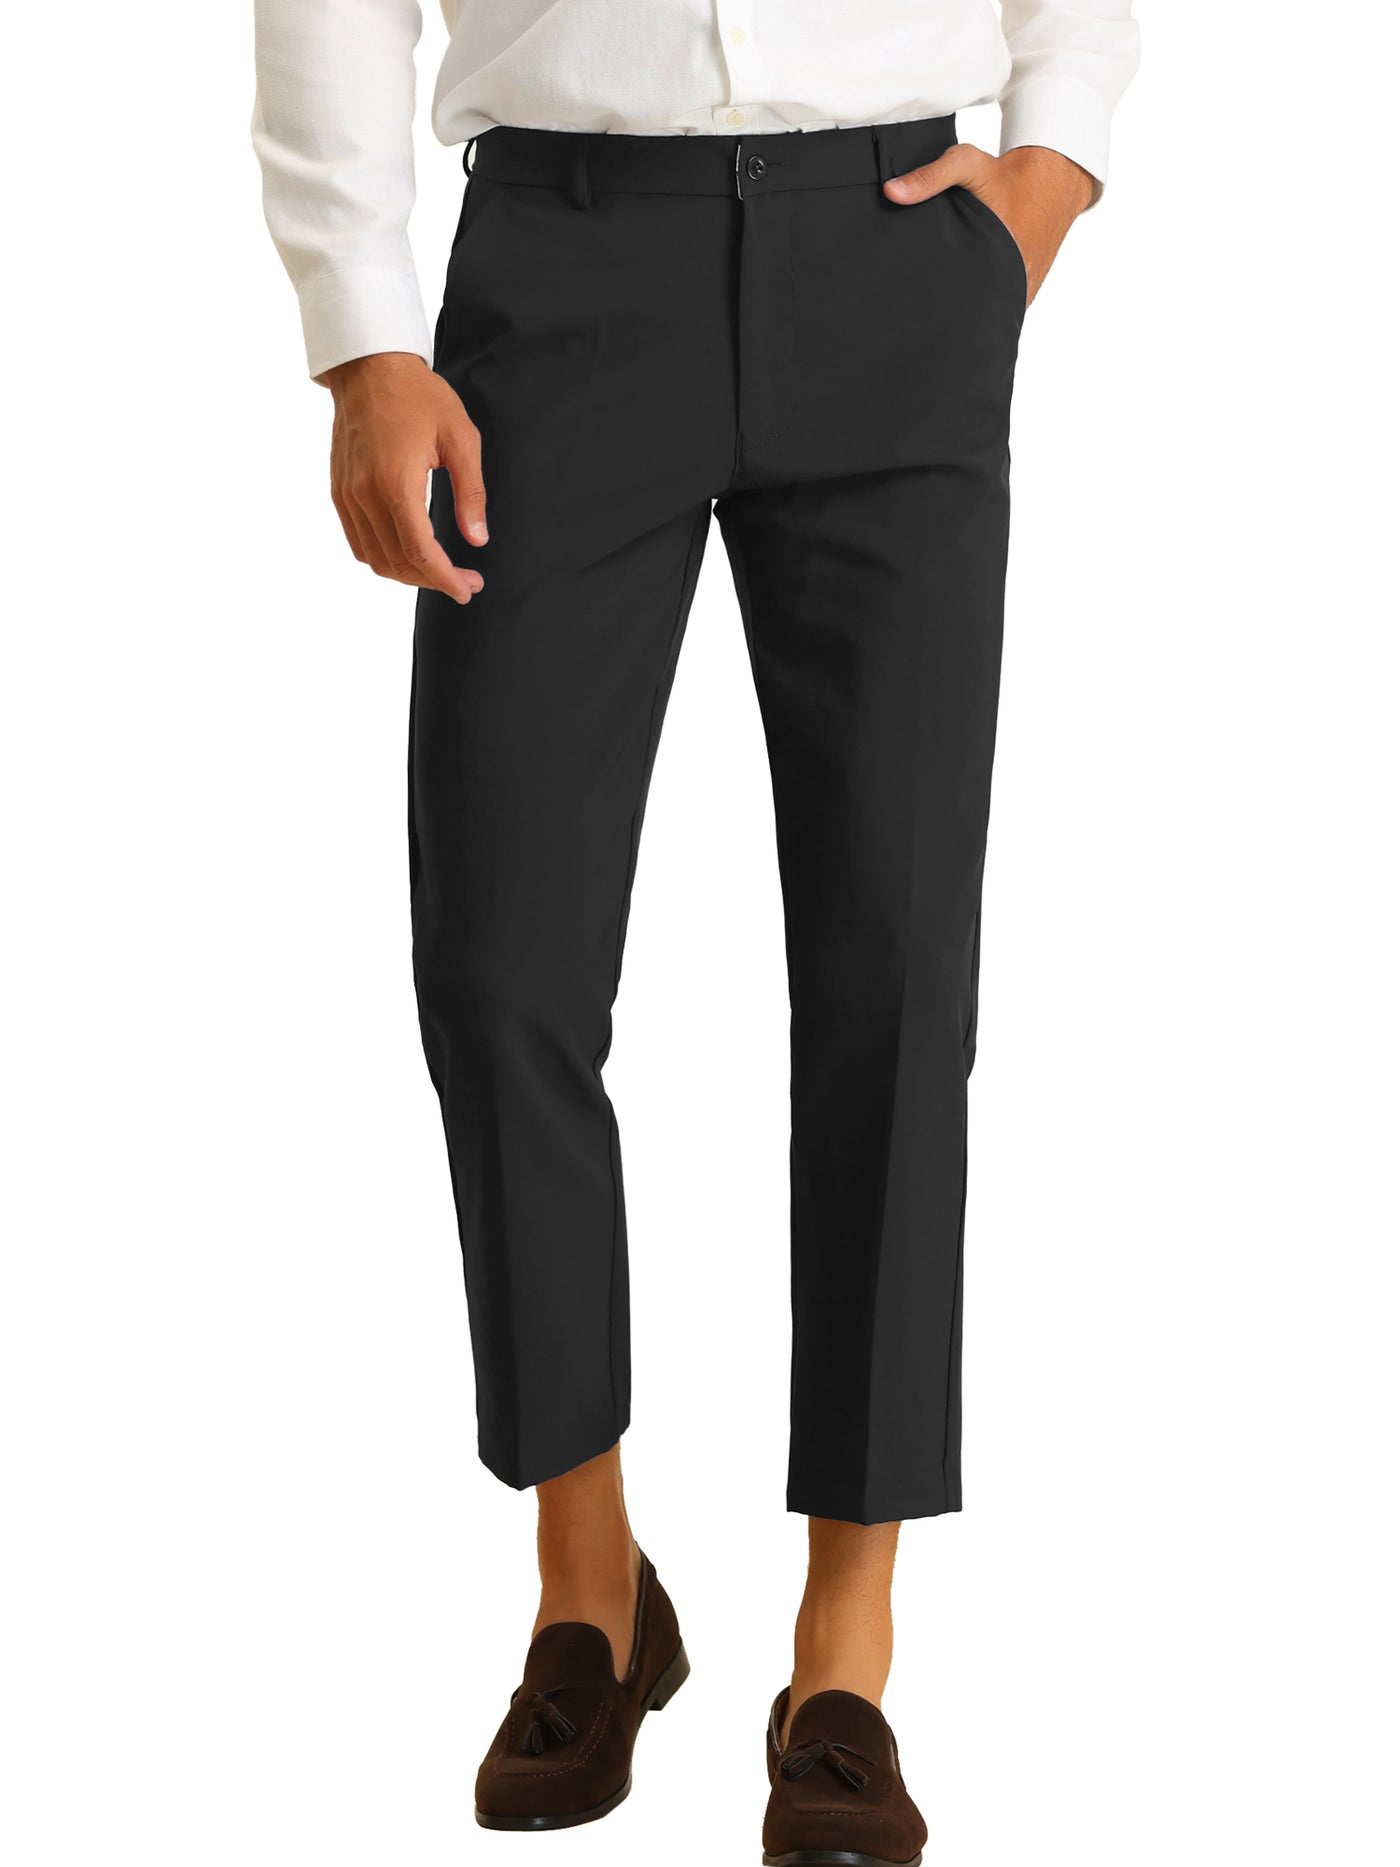 Bublédon Men's Business Cropped Solid Flat Front Chino Tapered Dress Pants